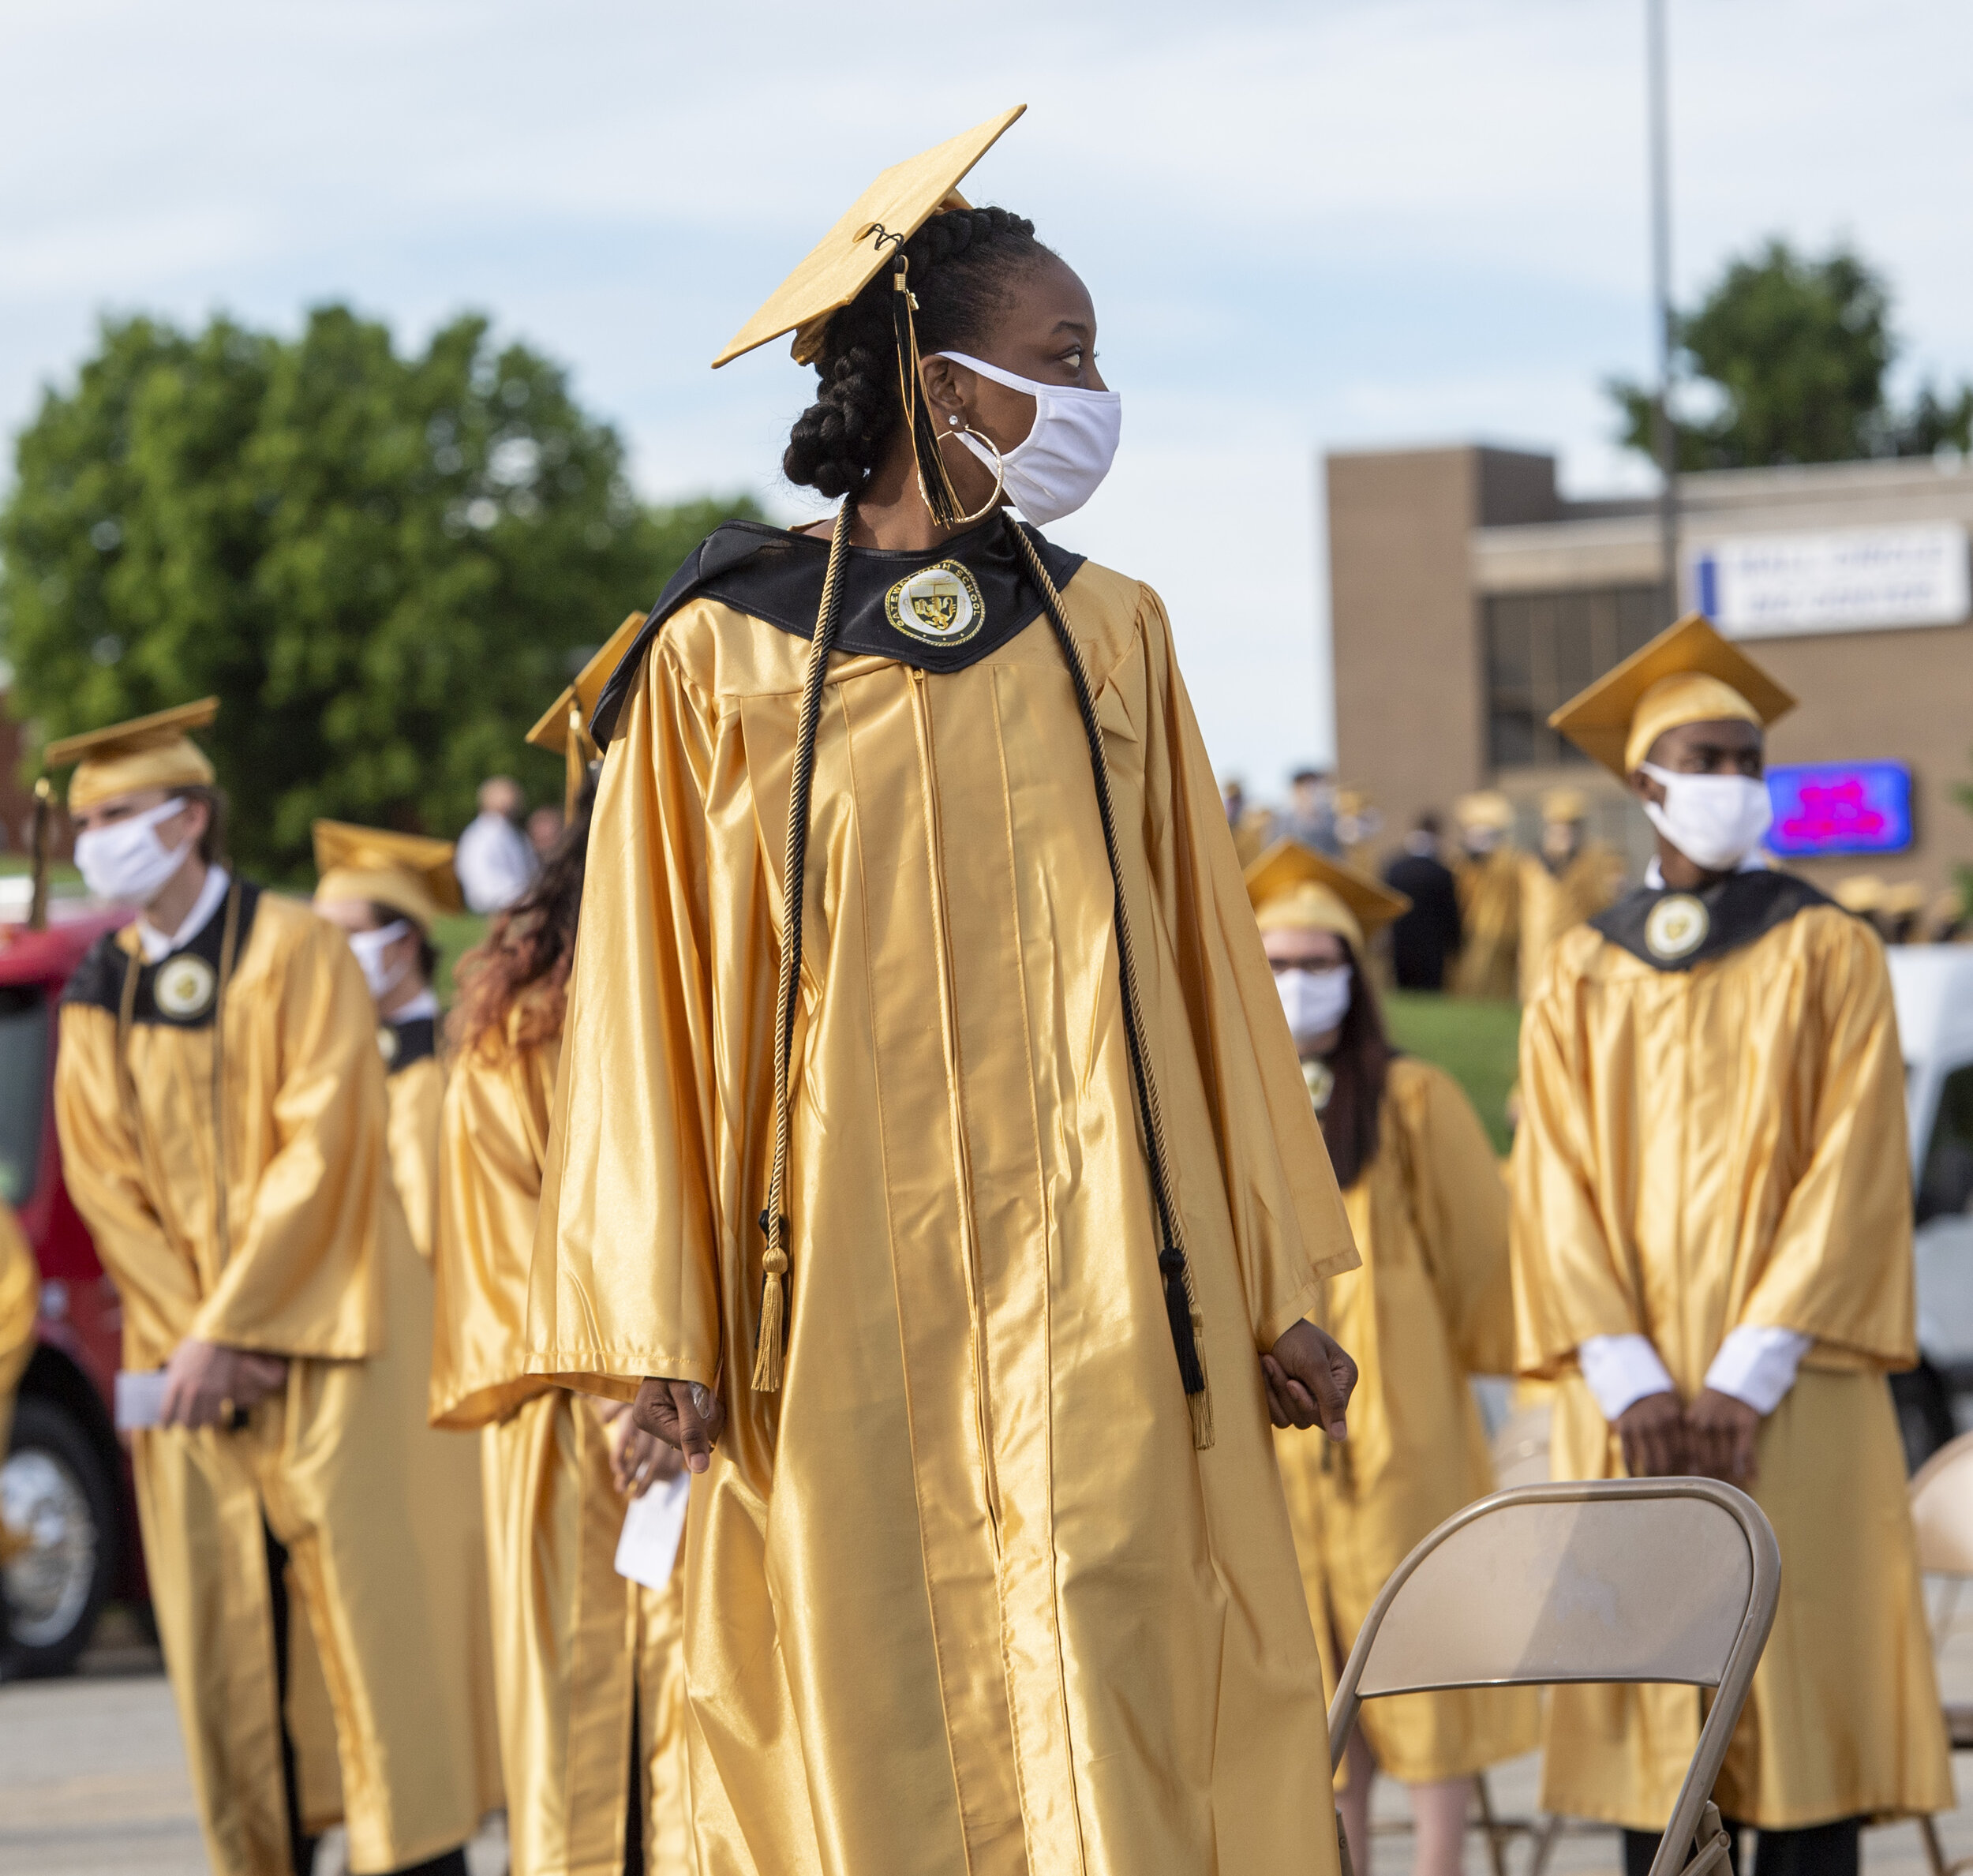  Selasi Agbodzie, a graduating senior at Gateway High School, stands with her classmates while maintaining six feet apart before the beginning of Gateway High School’s graduation ceremony on Wednesday, May 27, 2020, in the Macy’s parking lot at the M